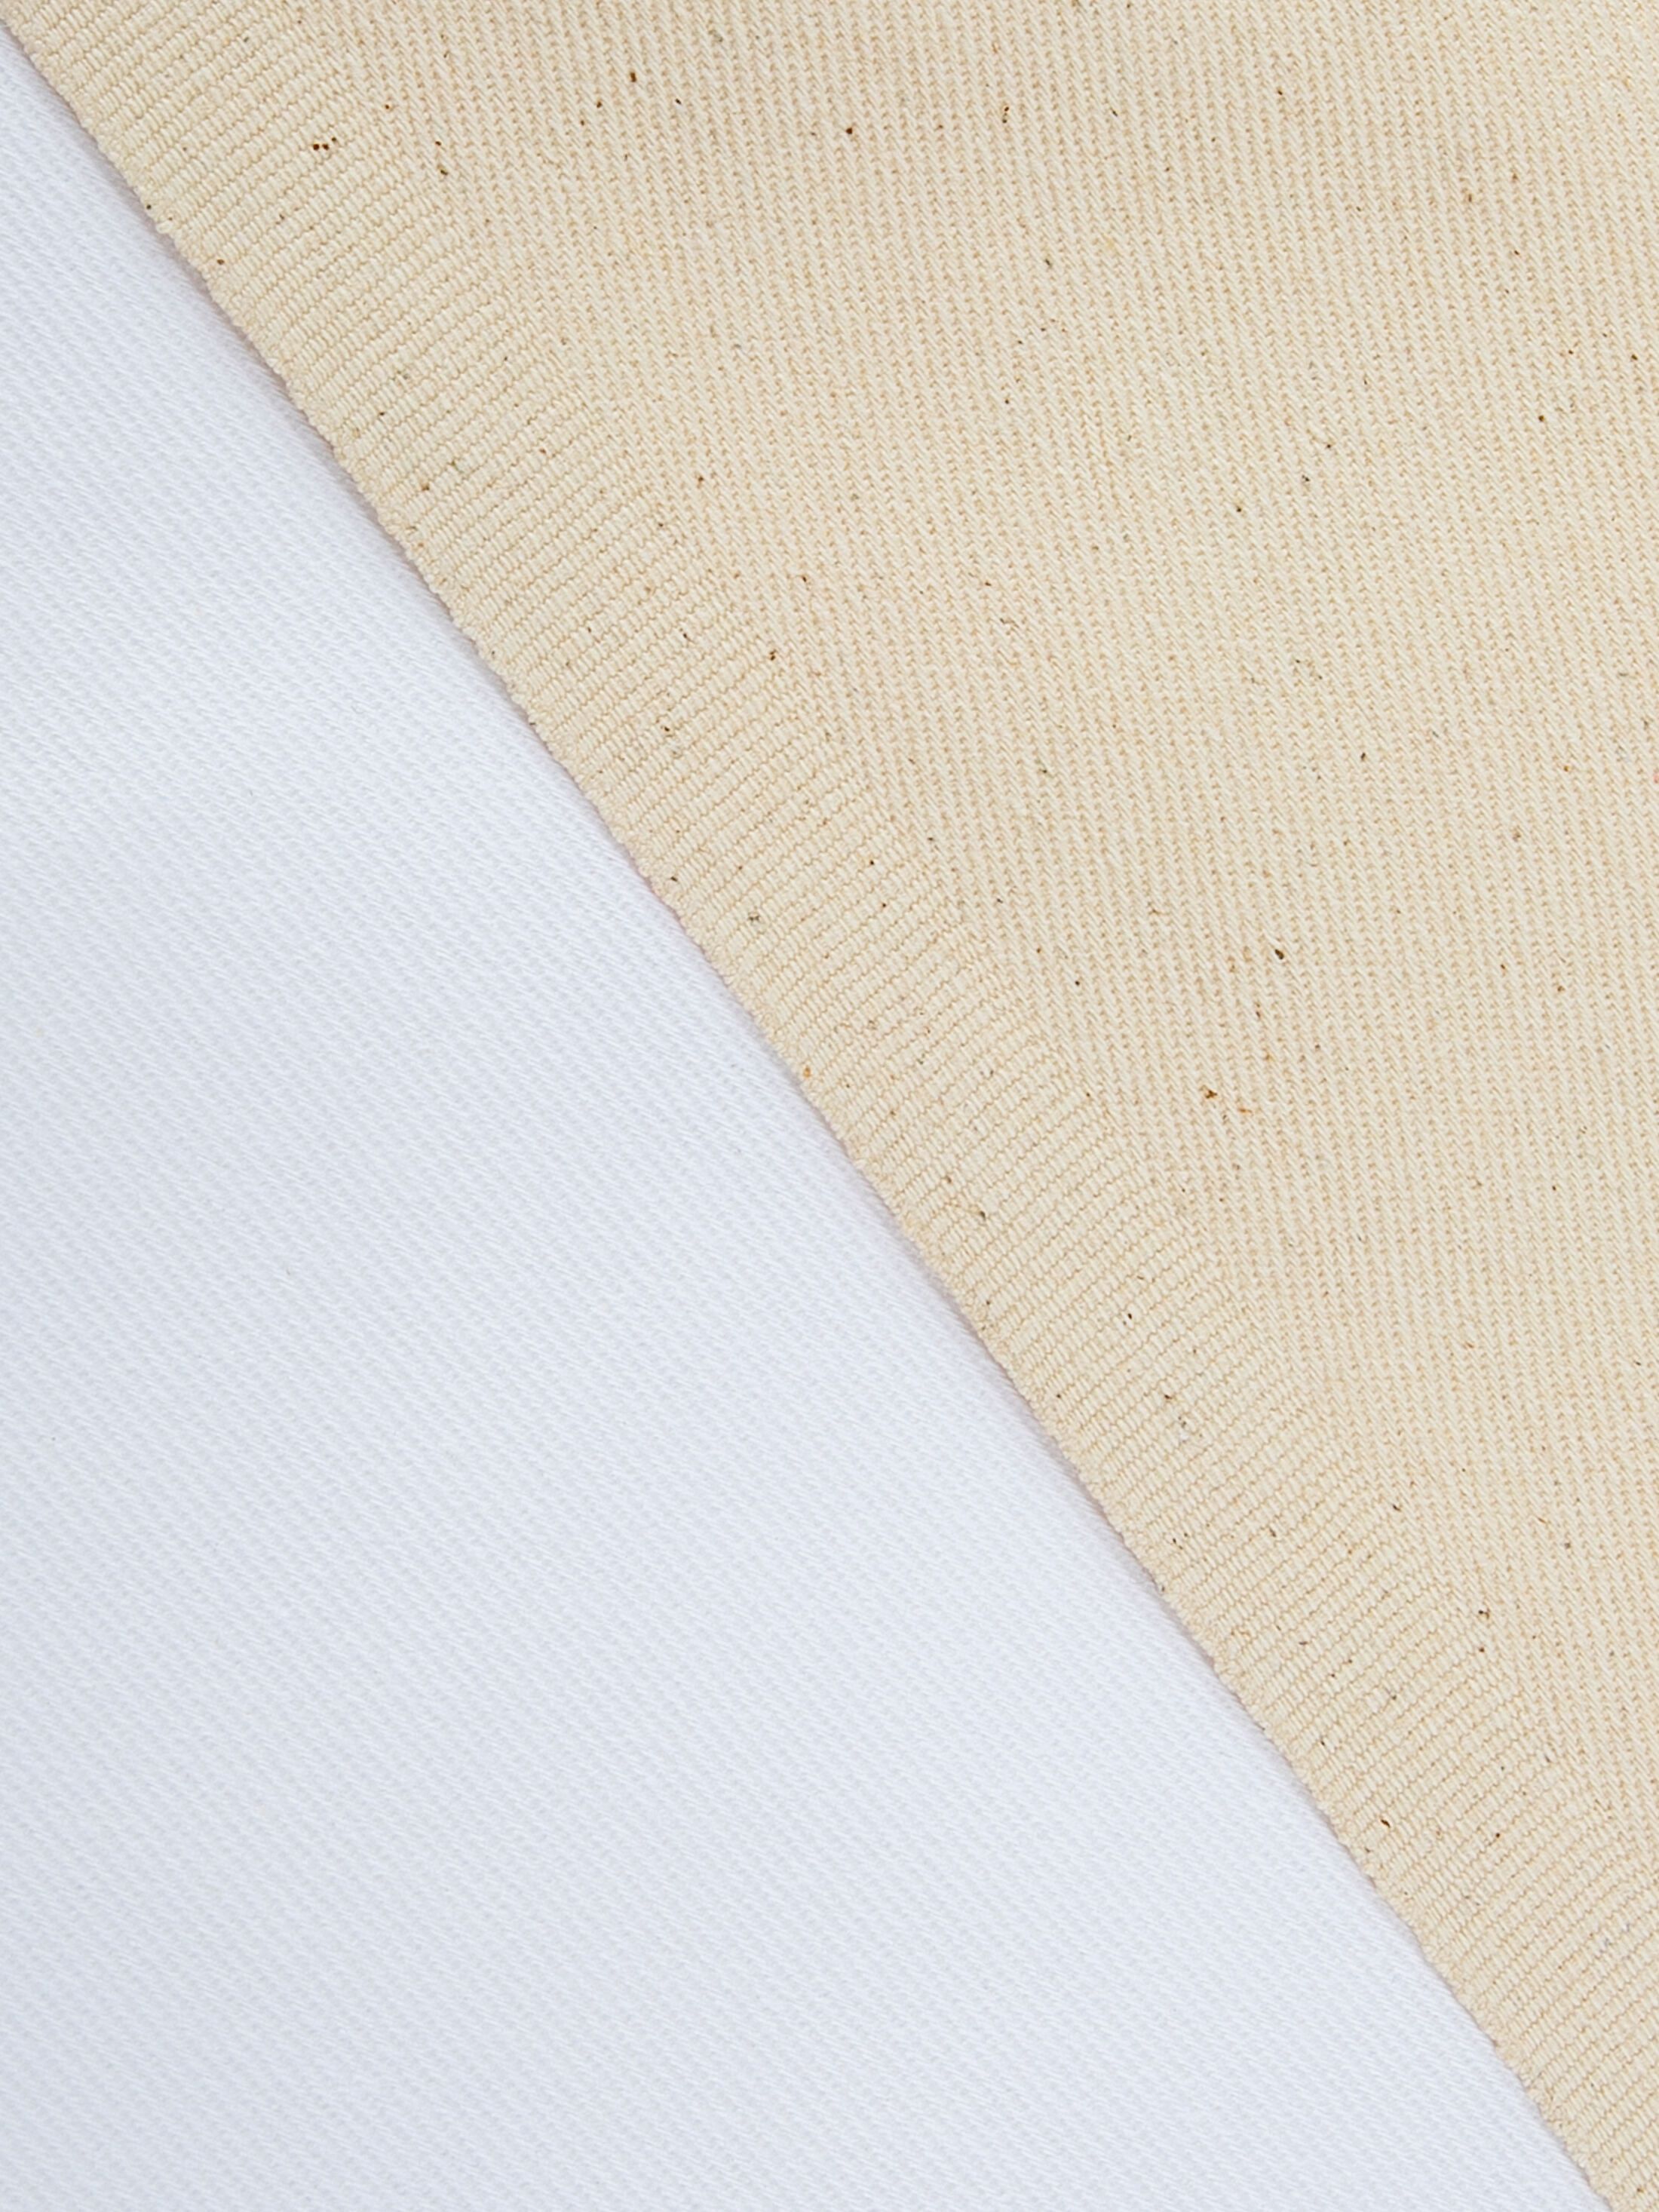 white and natural cotton twill